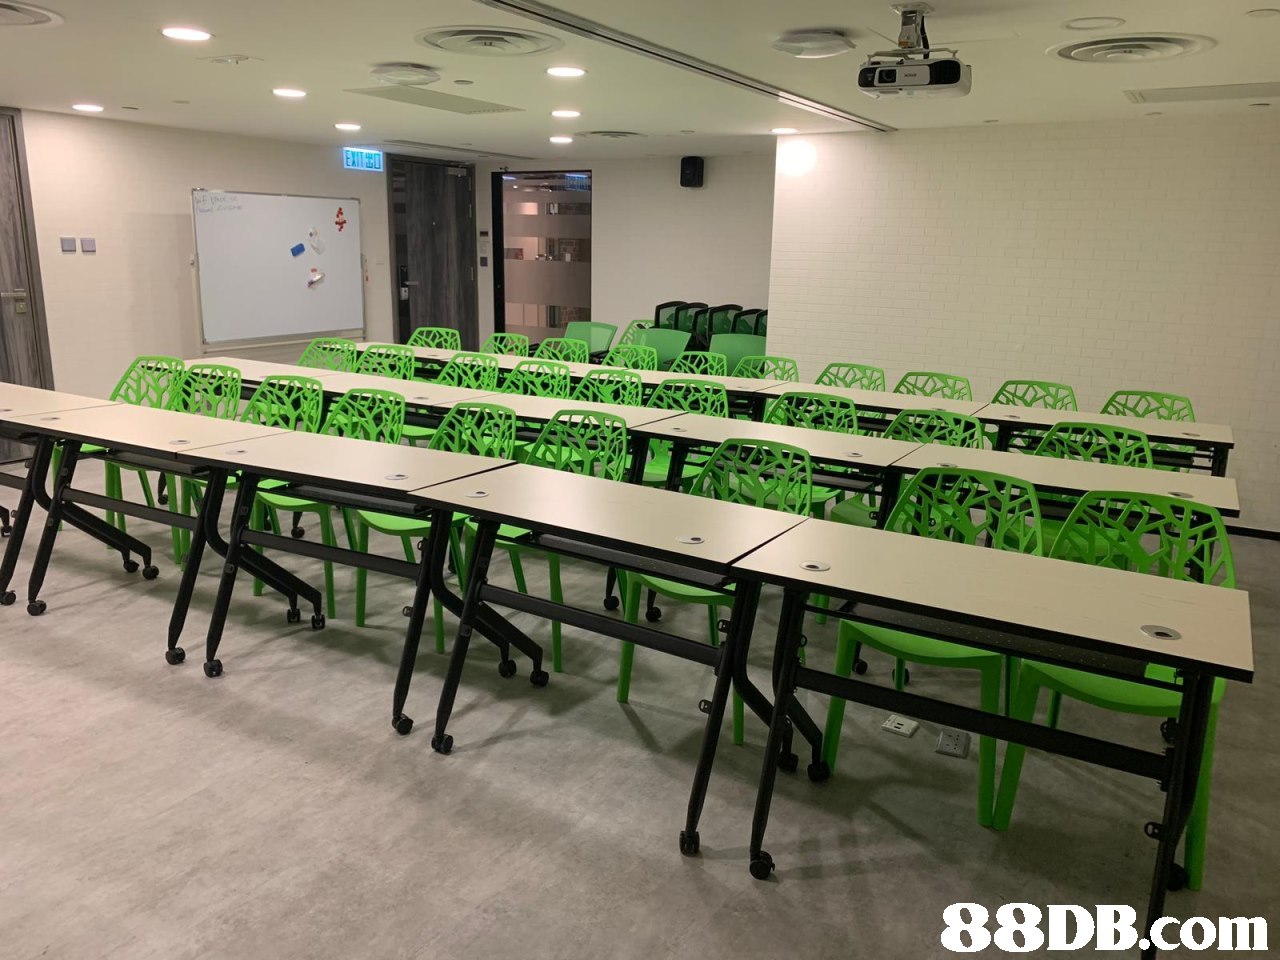   table,furniture,conference hall,classroom,